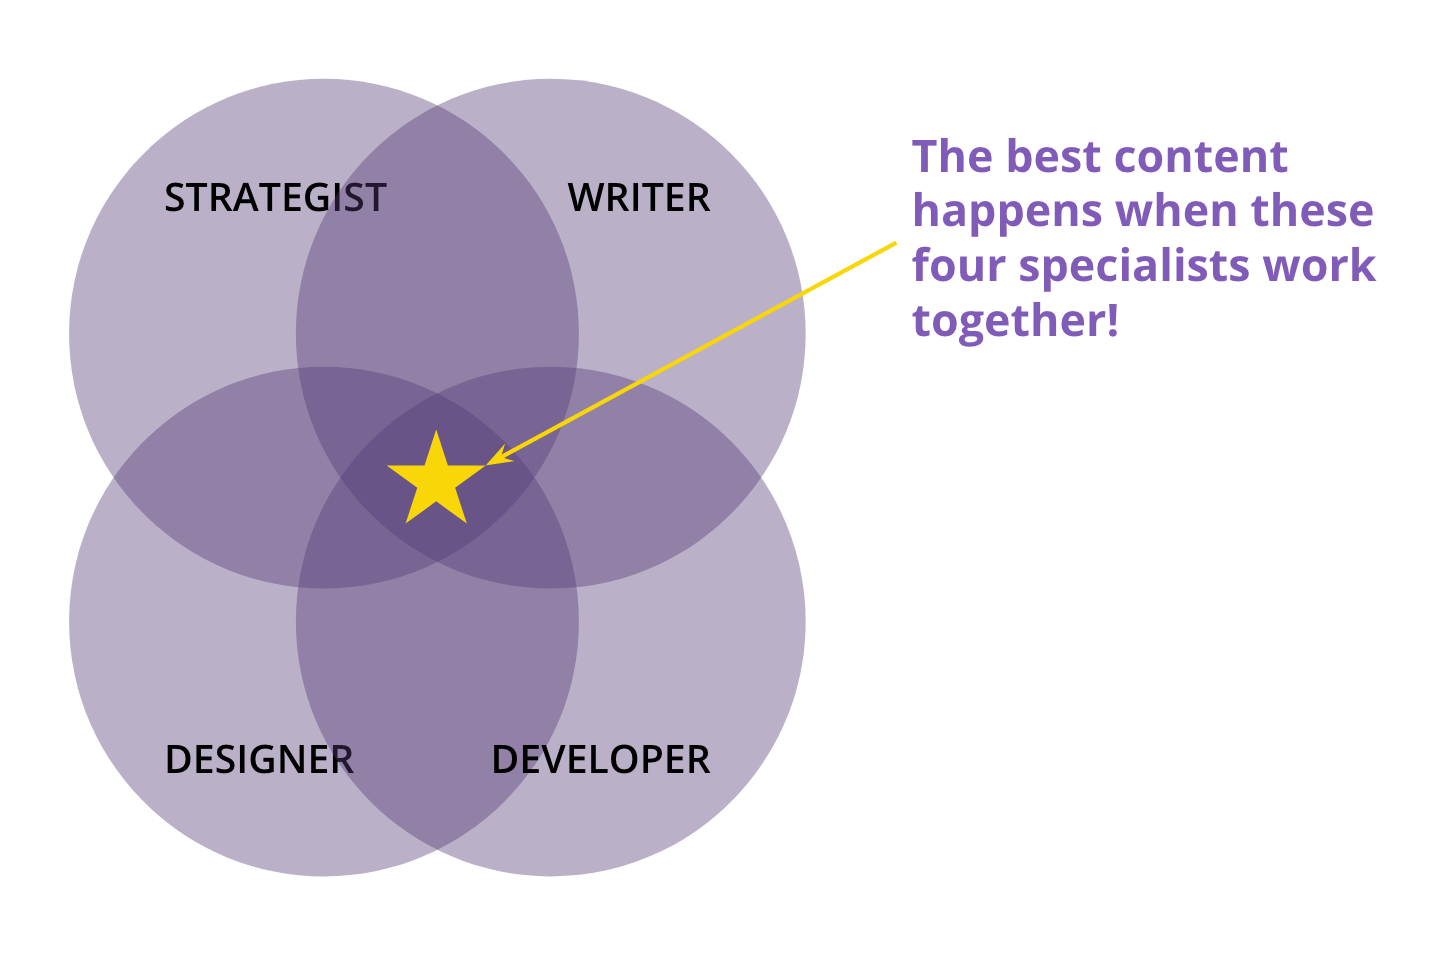 The ideal content team has a strategist, a writer, a designer, and a developer